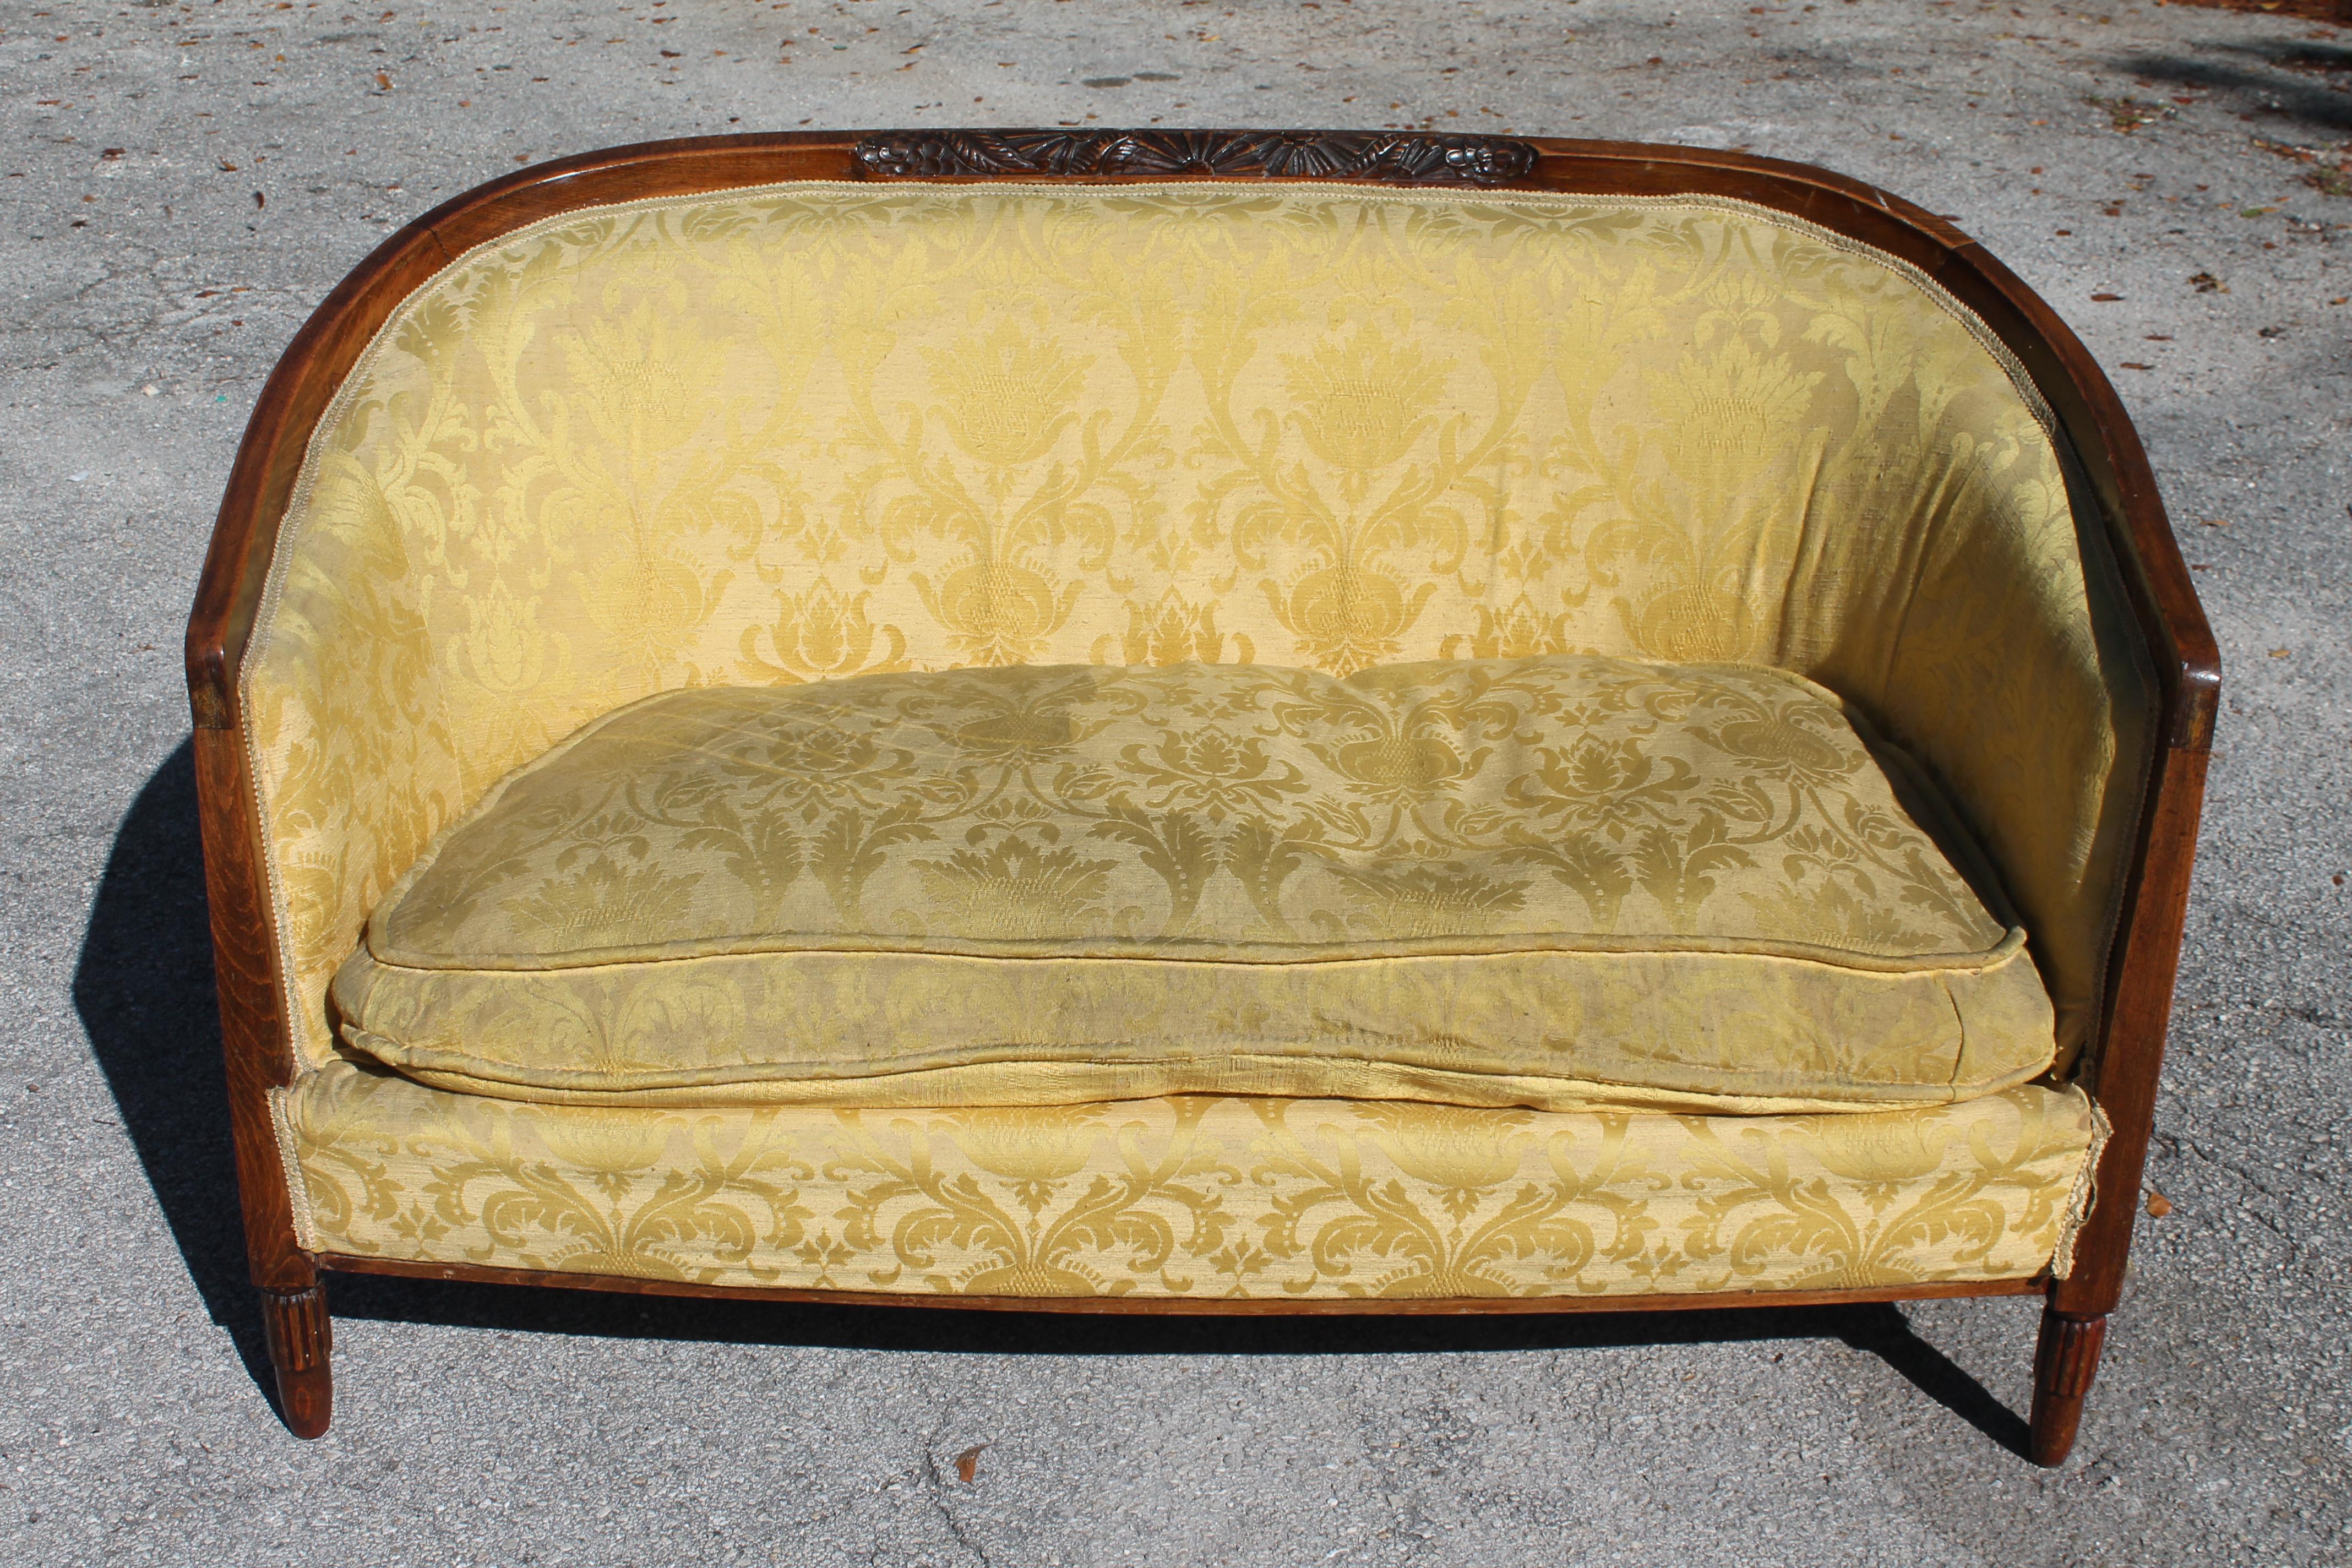 c1930's French Art Deco Canape/ Sofa. Rare piece! Wood frame beautifully carved. Hard to find these period pieces. Reupholstery recommended. 